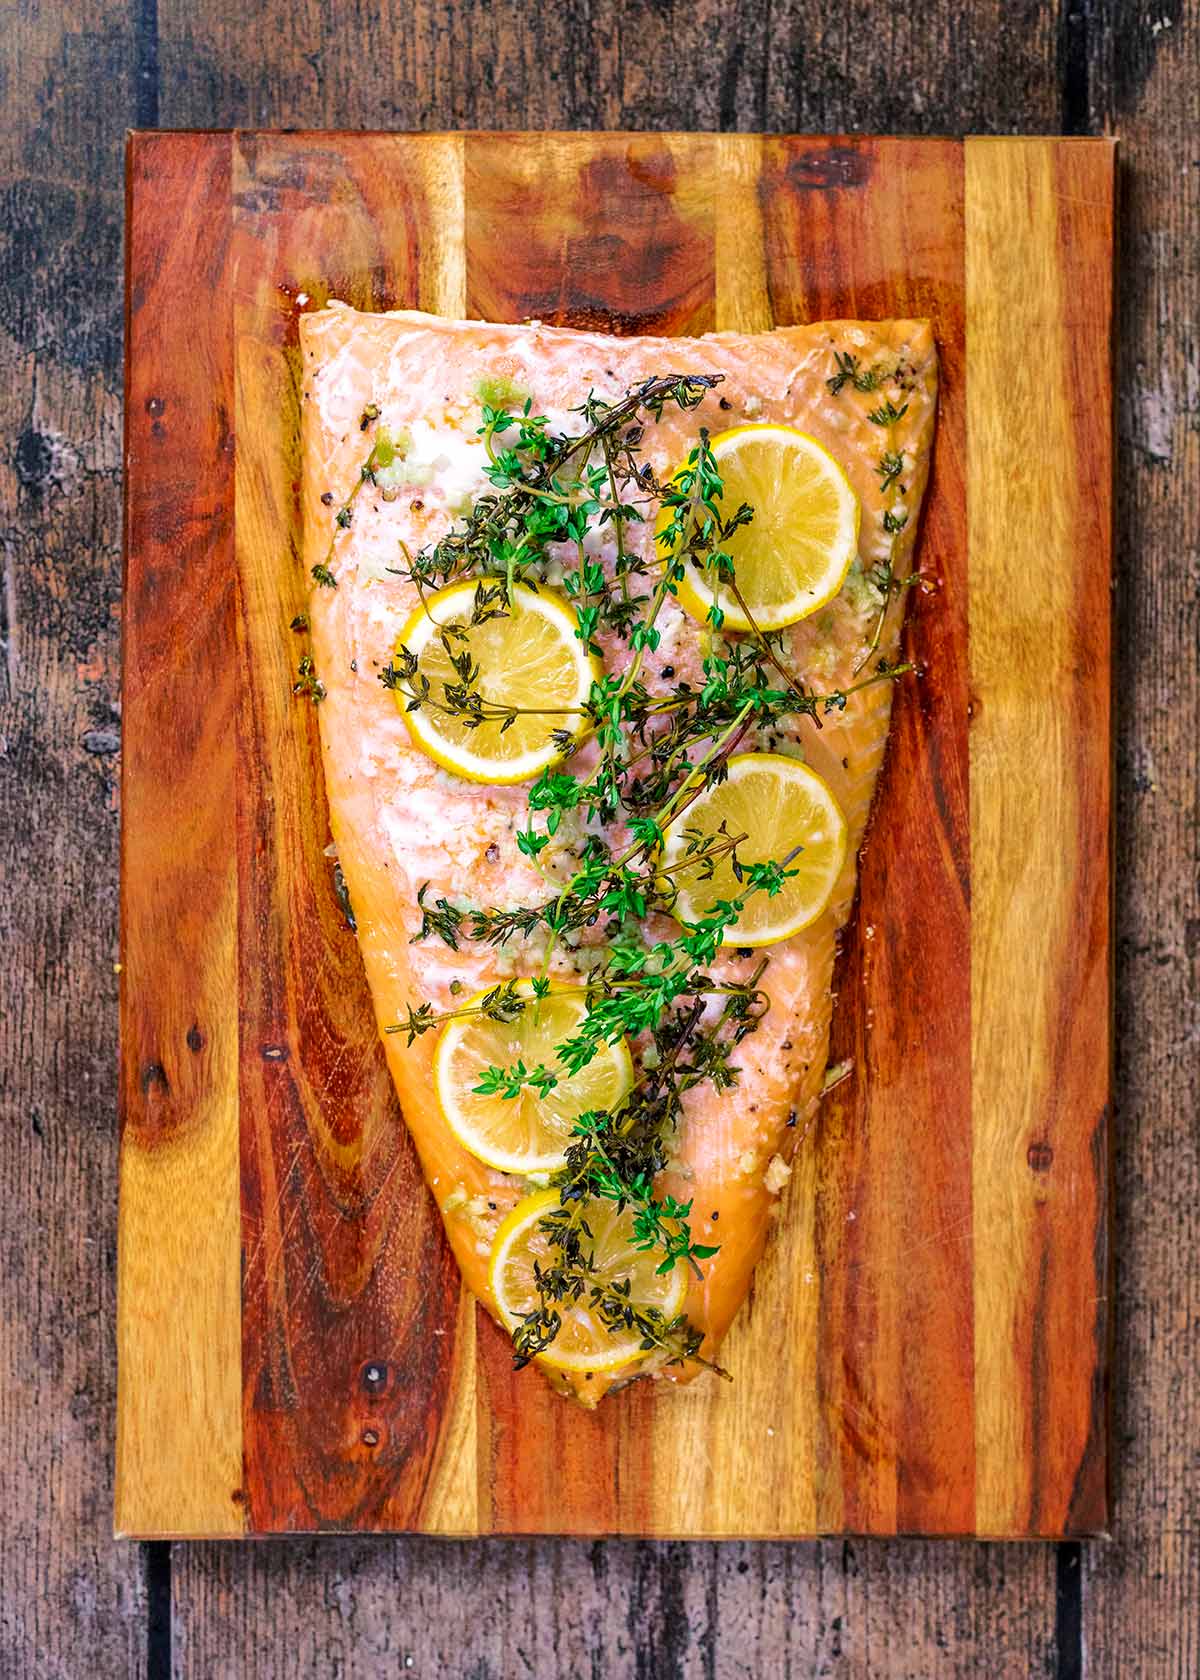 A cooked side of salmon on a wooden board.